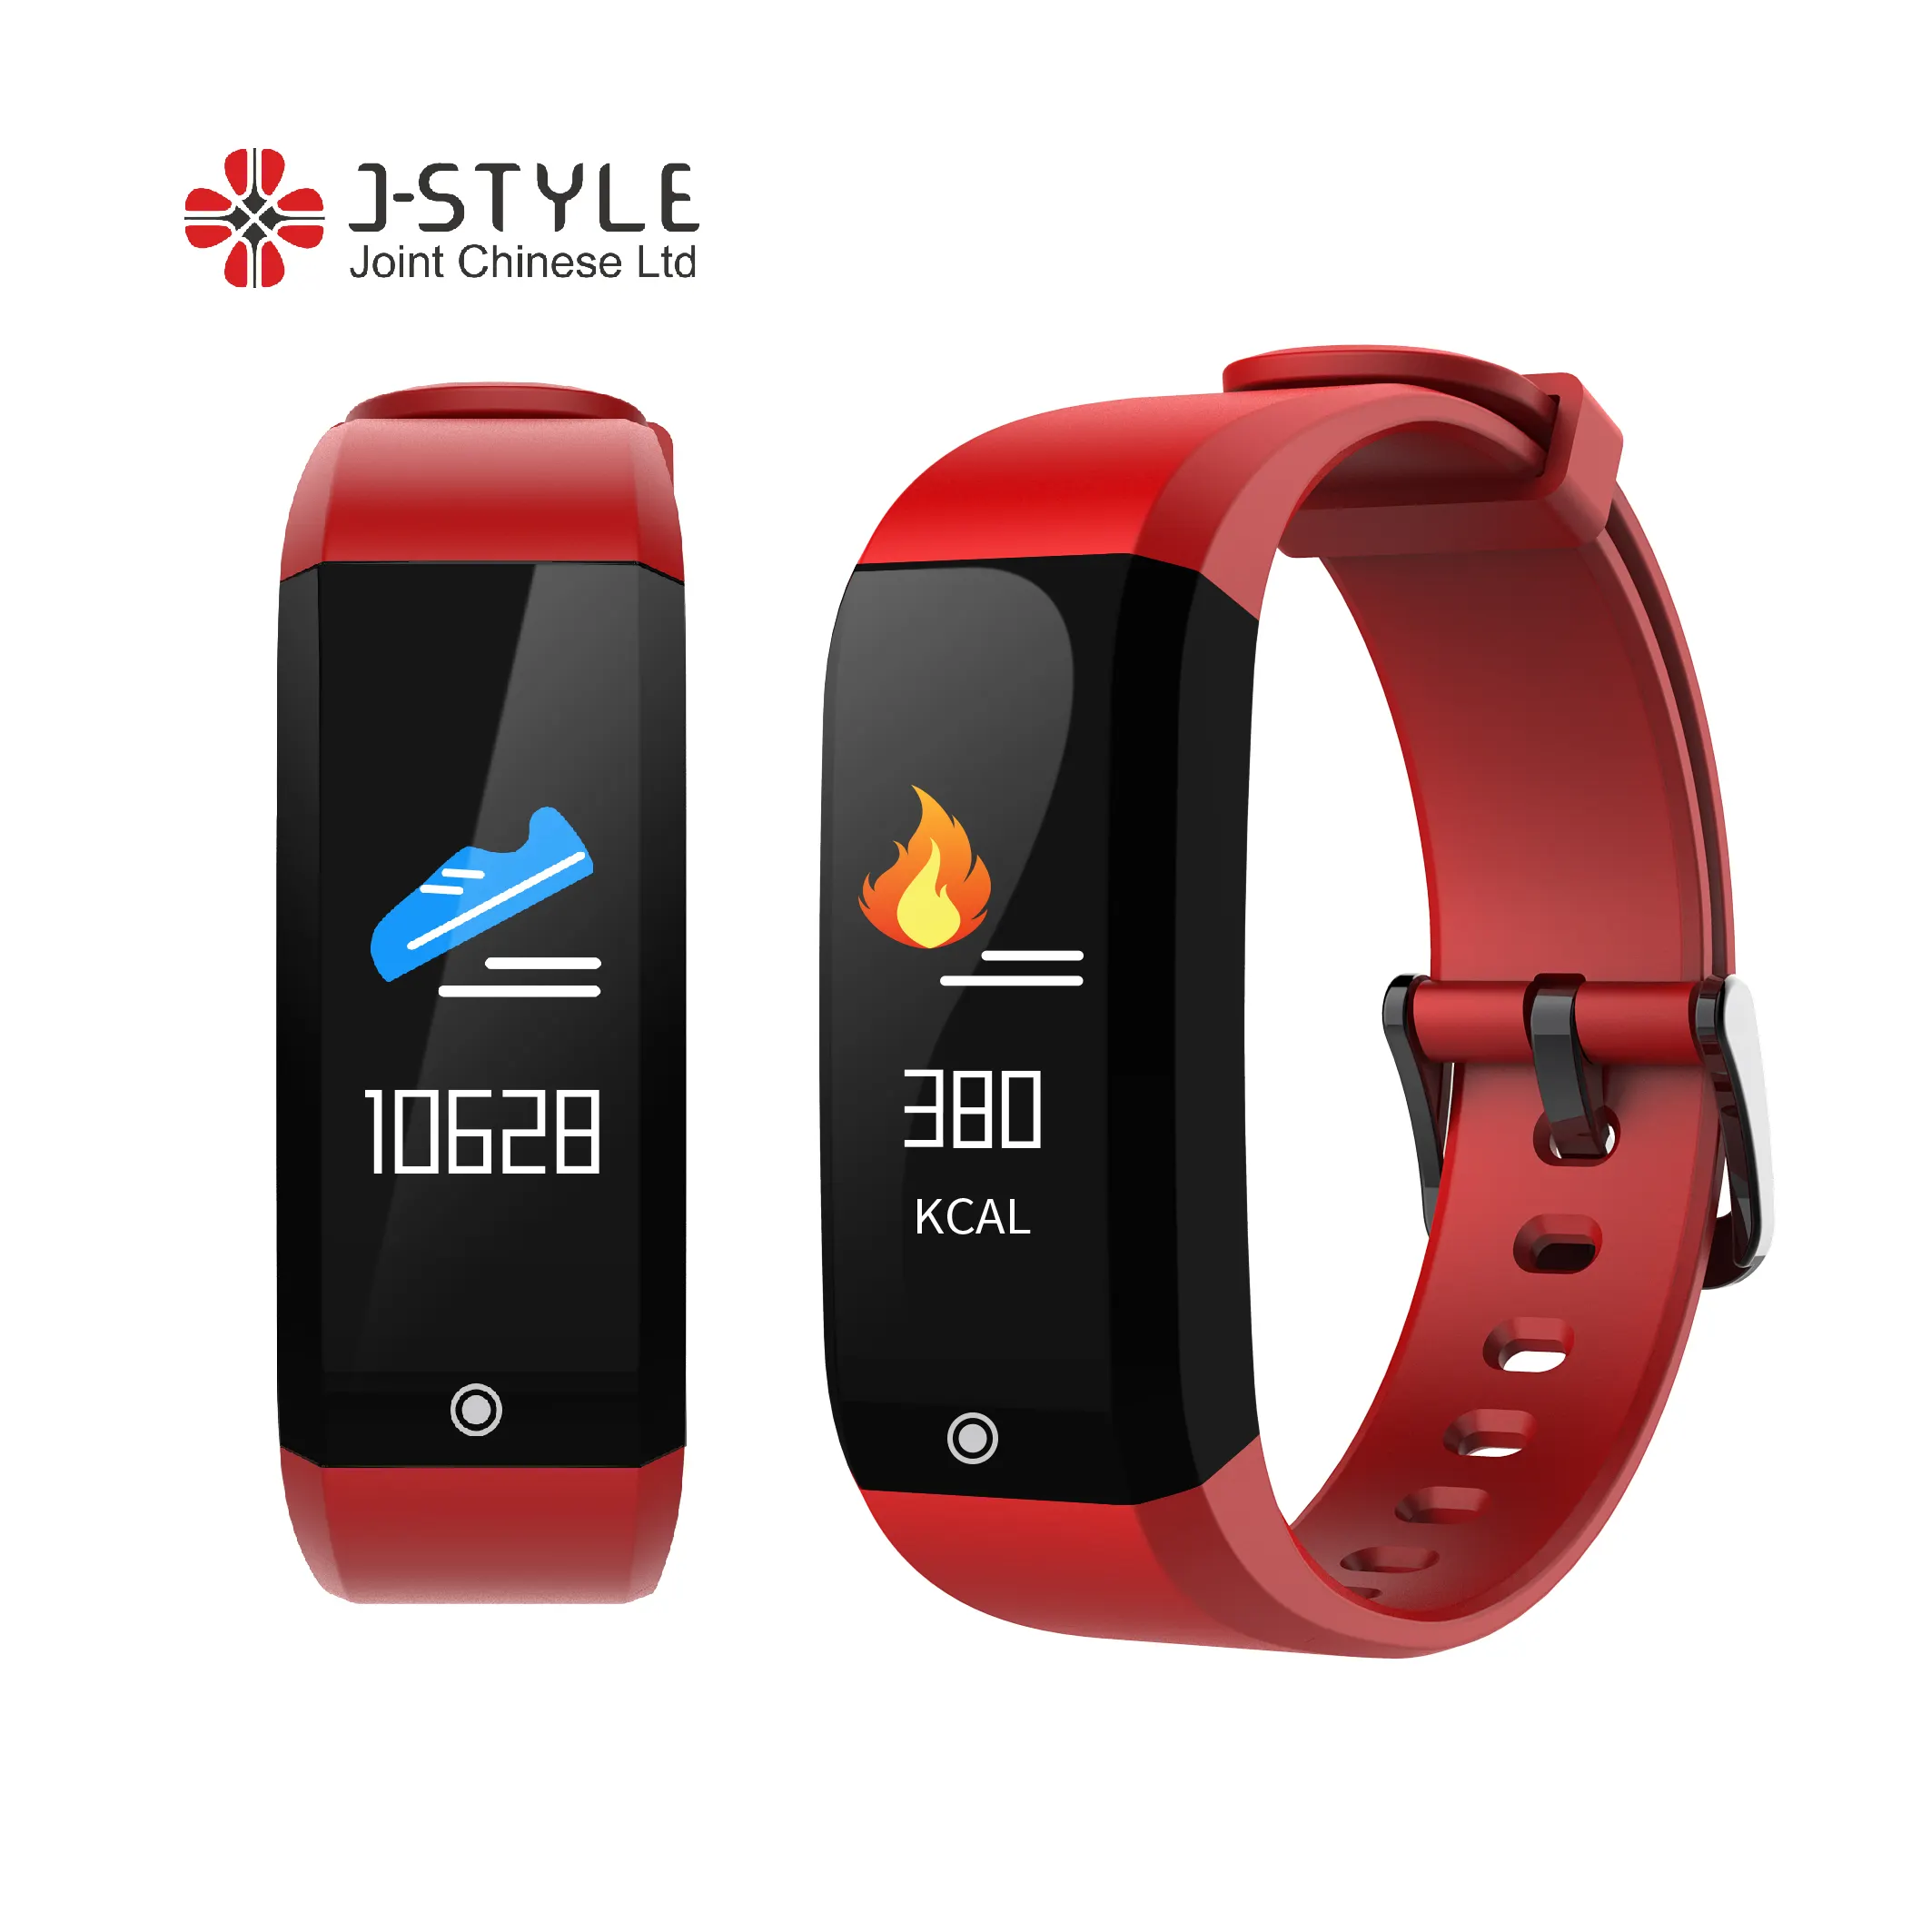 J-Style 1810 Android iOS Application Supported Dynamic Heart Rate Fitness Tracker Smart Watch with Color Display